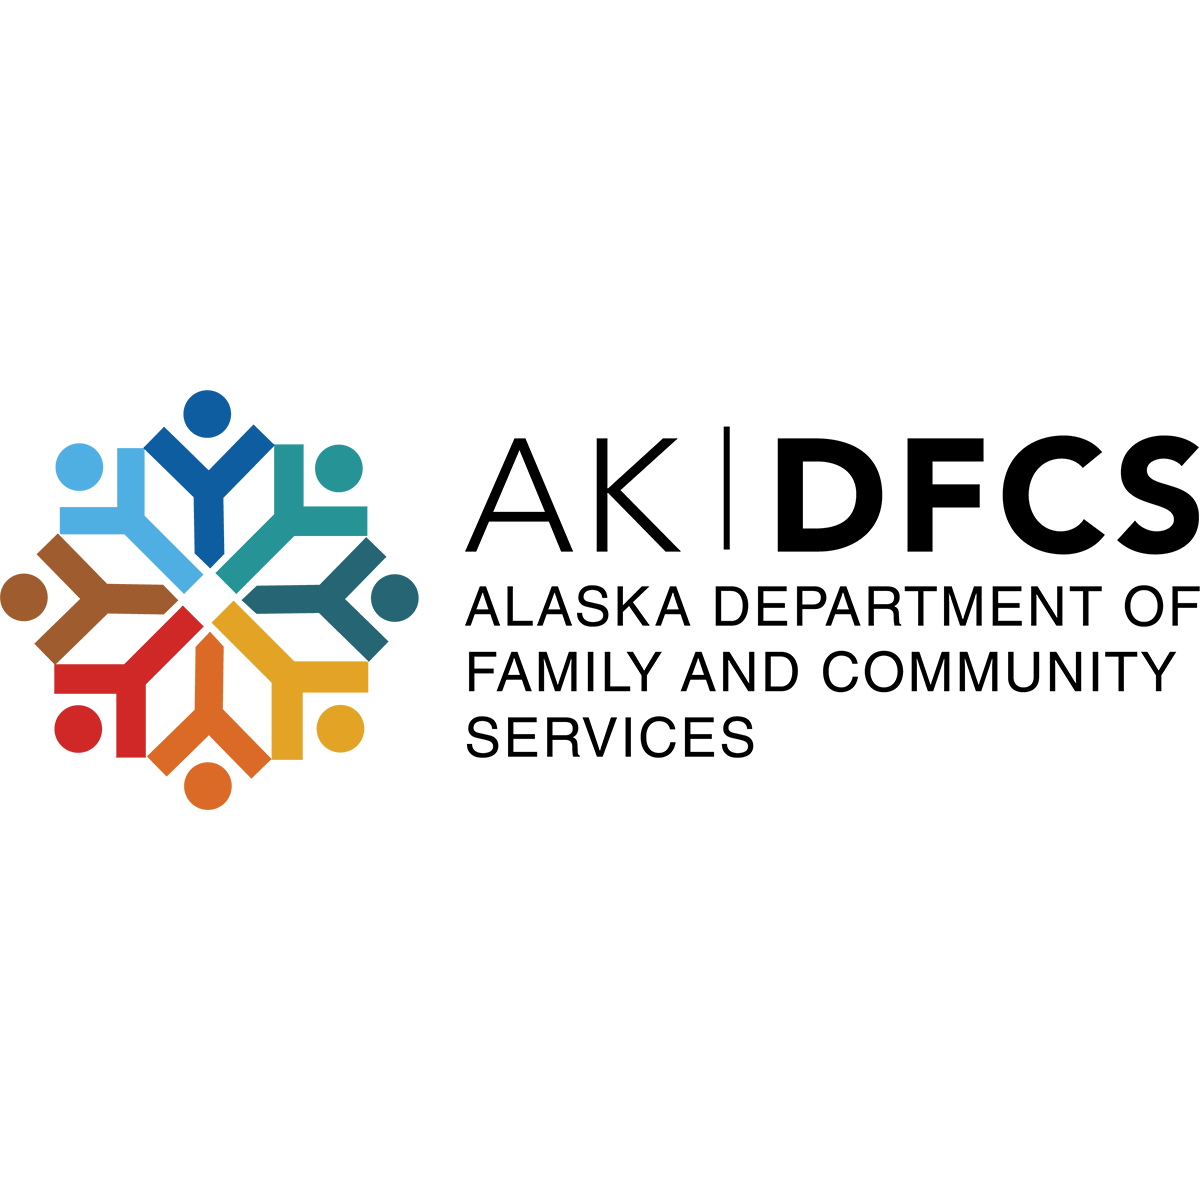 Alaska Department of Family and Community Services Logo